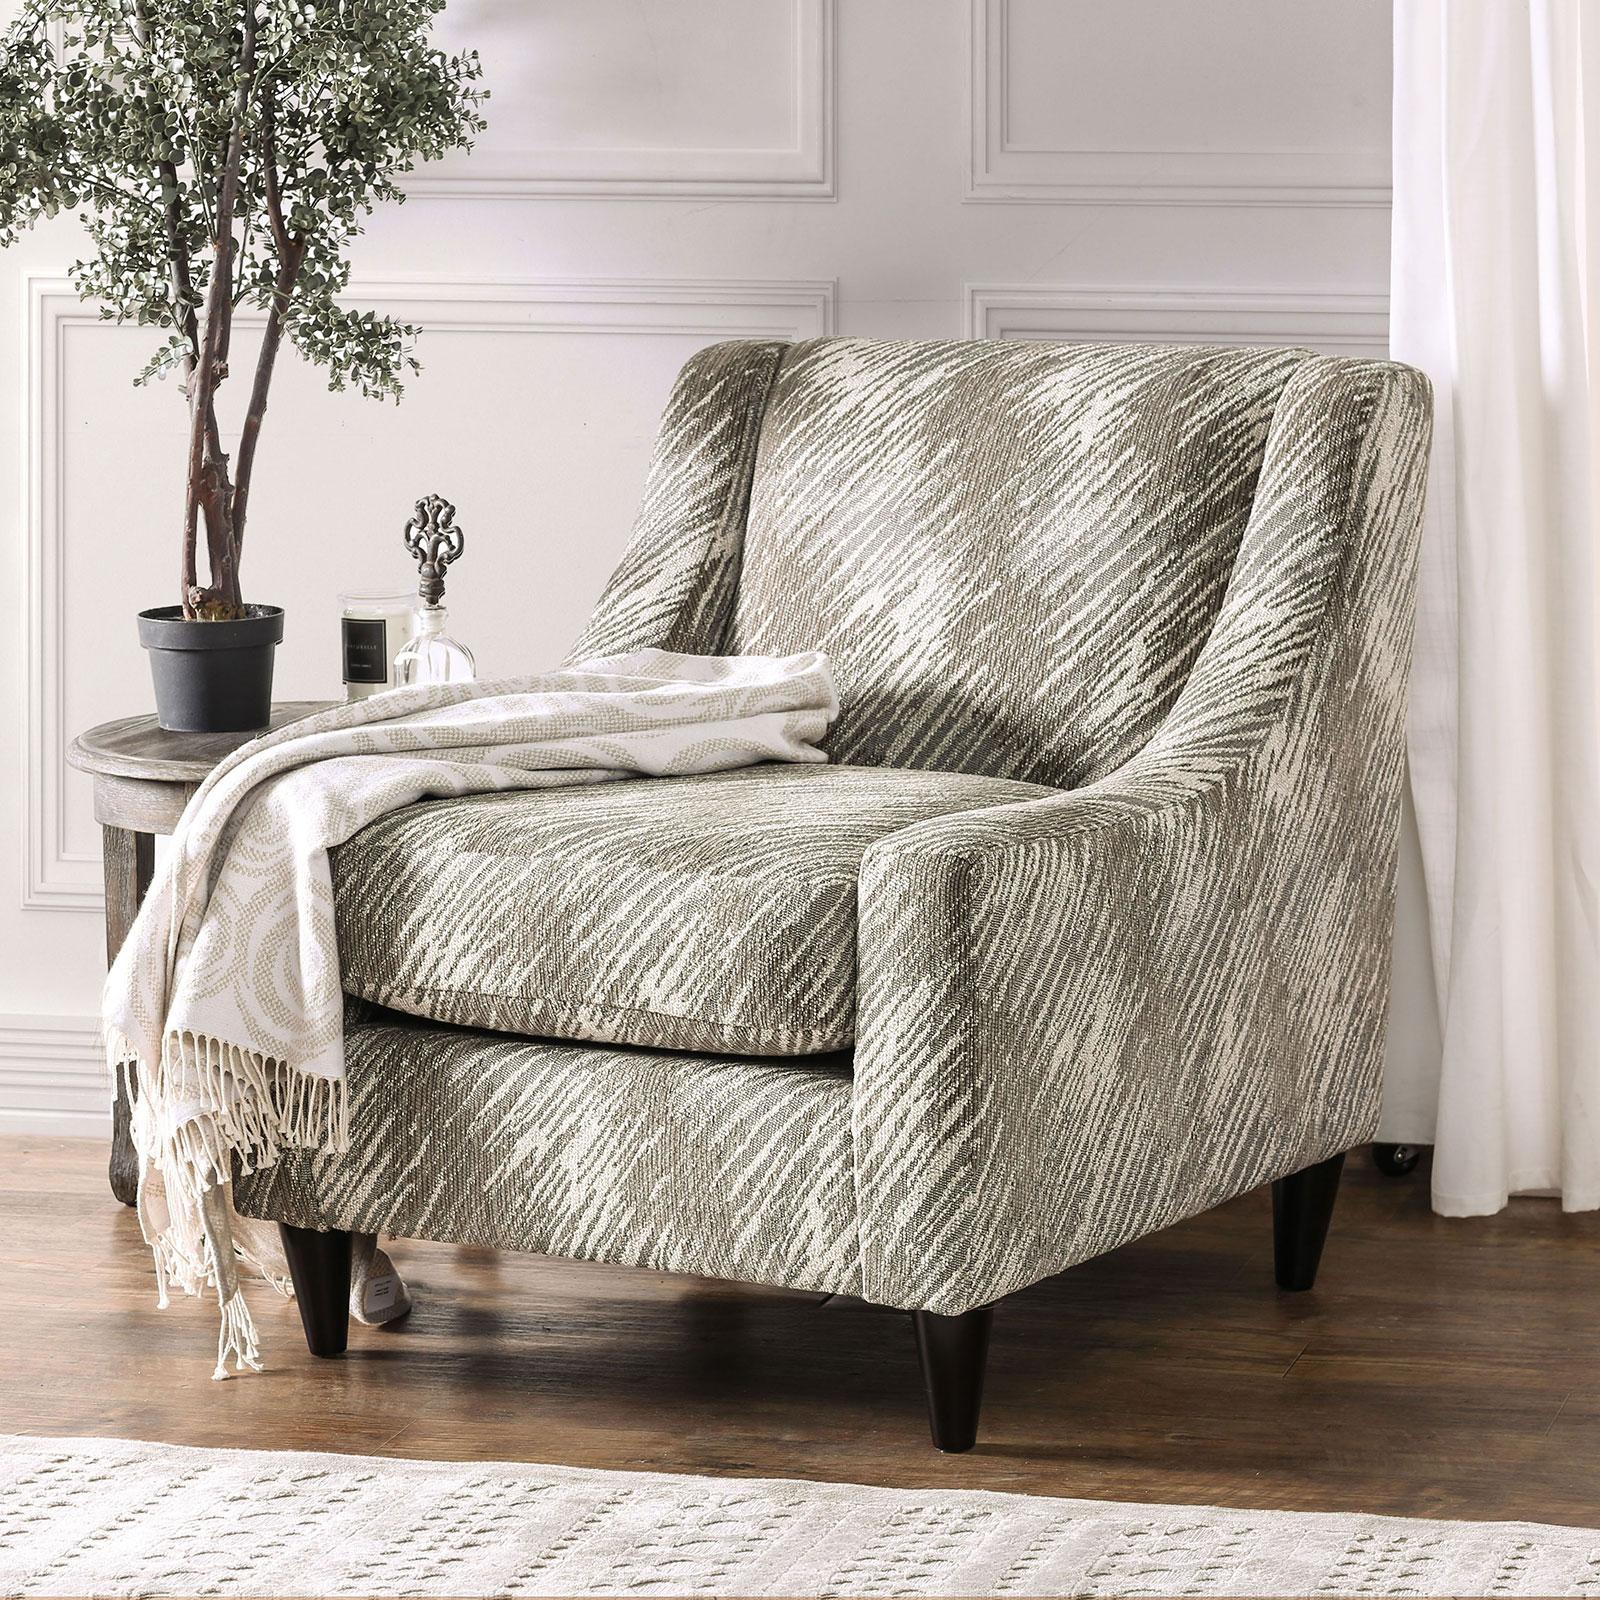 Transitional Chair STEFANO SM8220-CH SM8220-CH in Brown Fabric